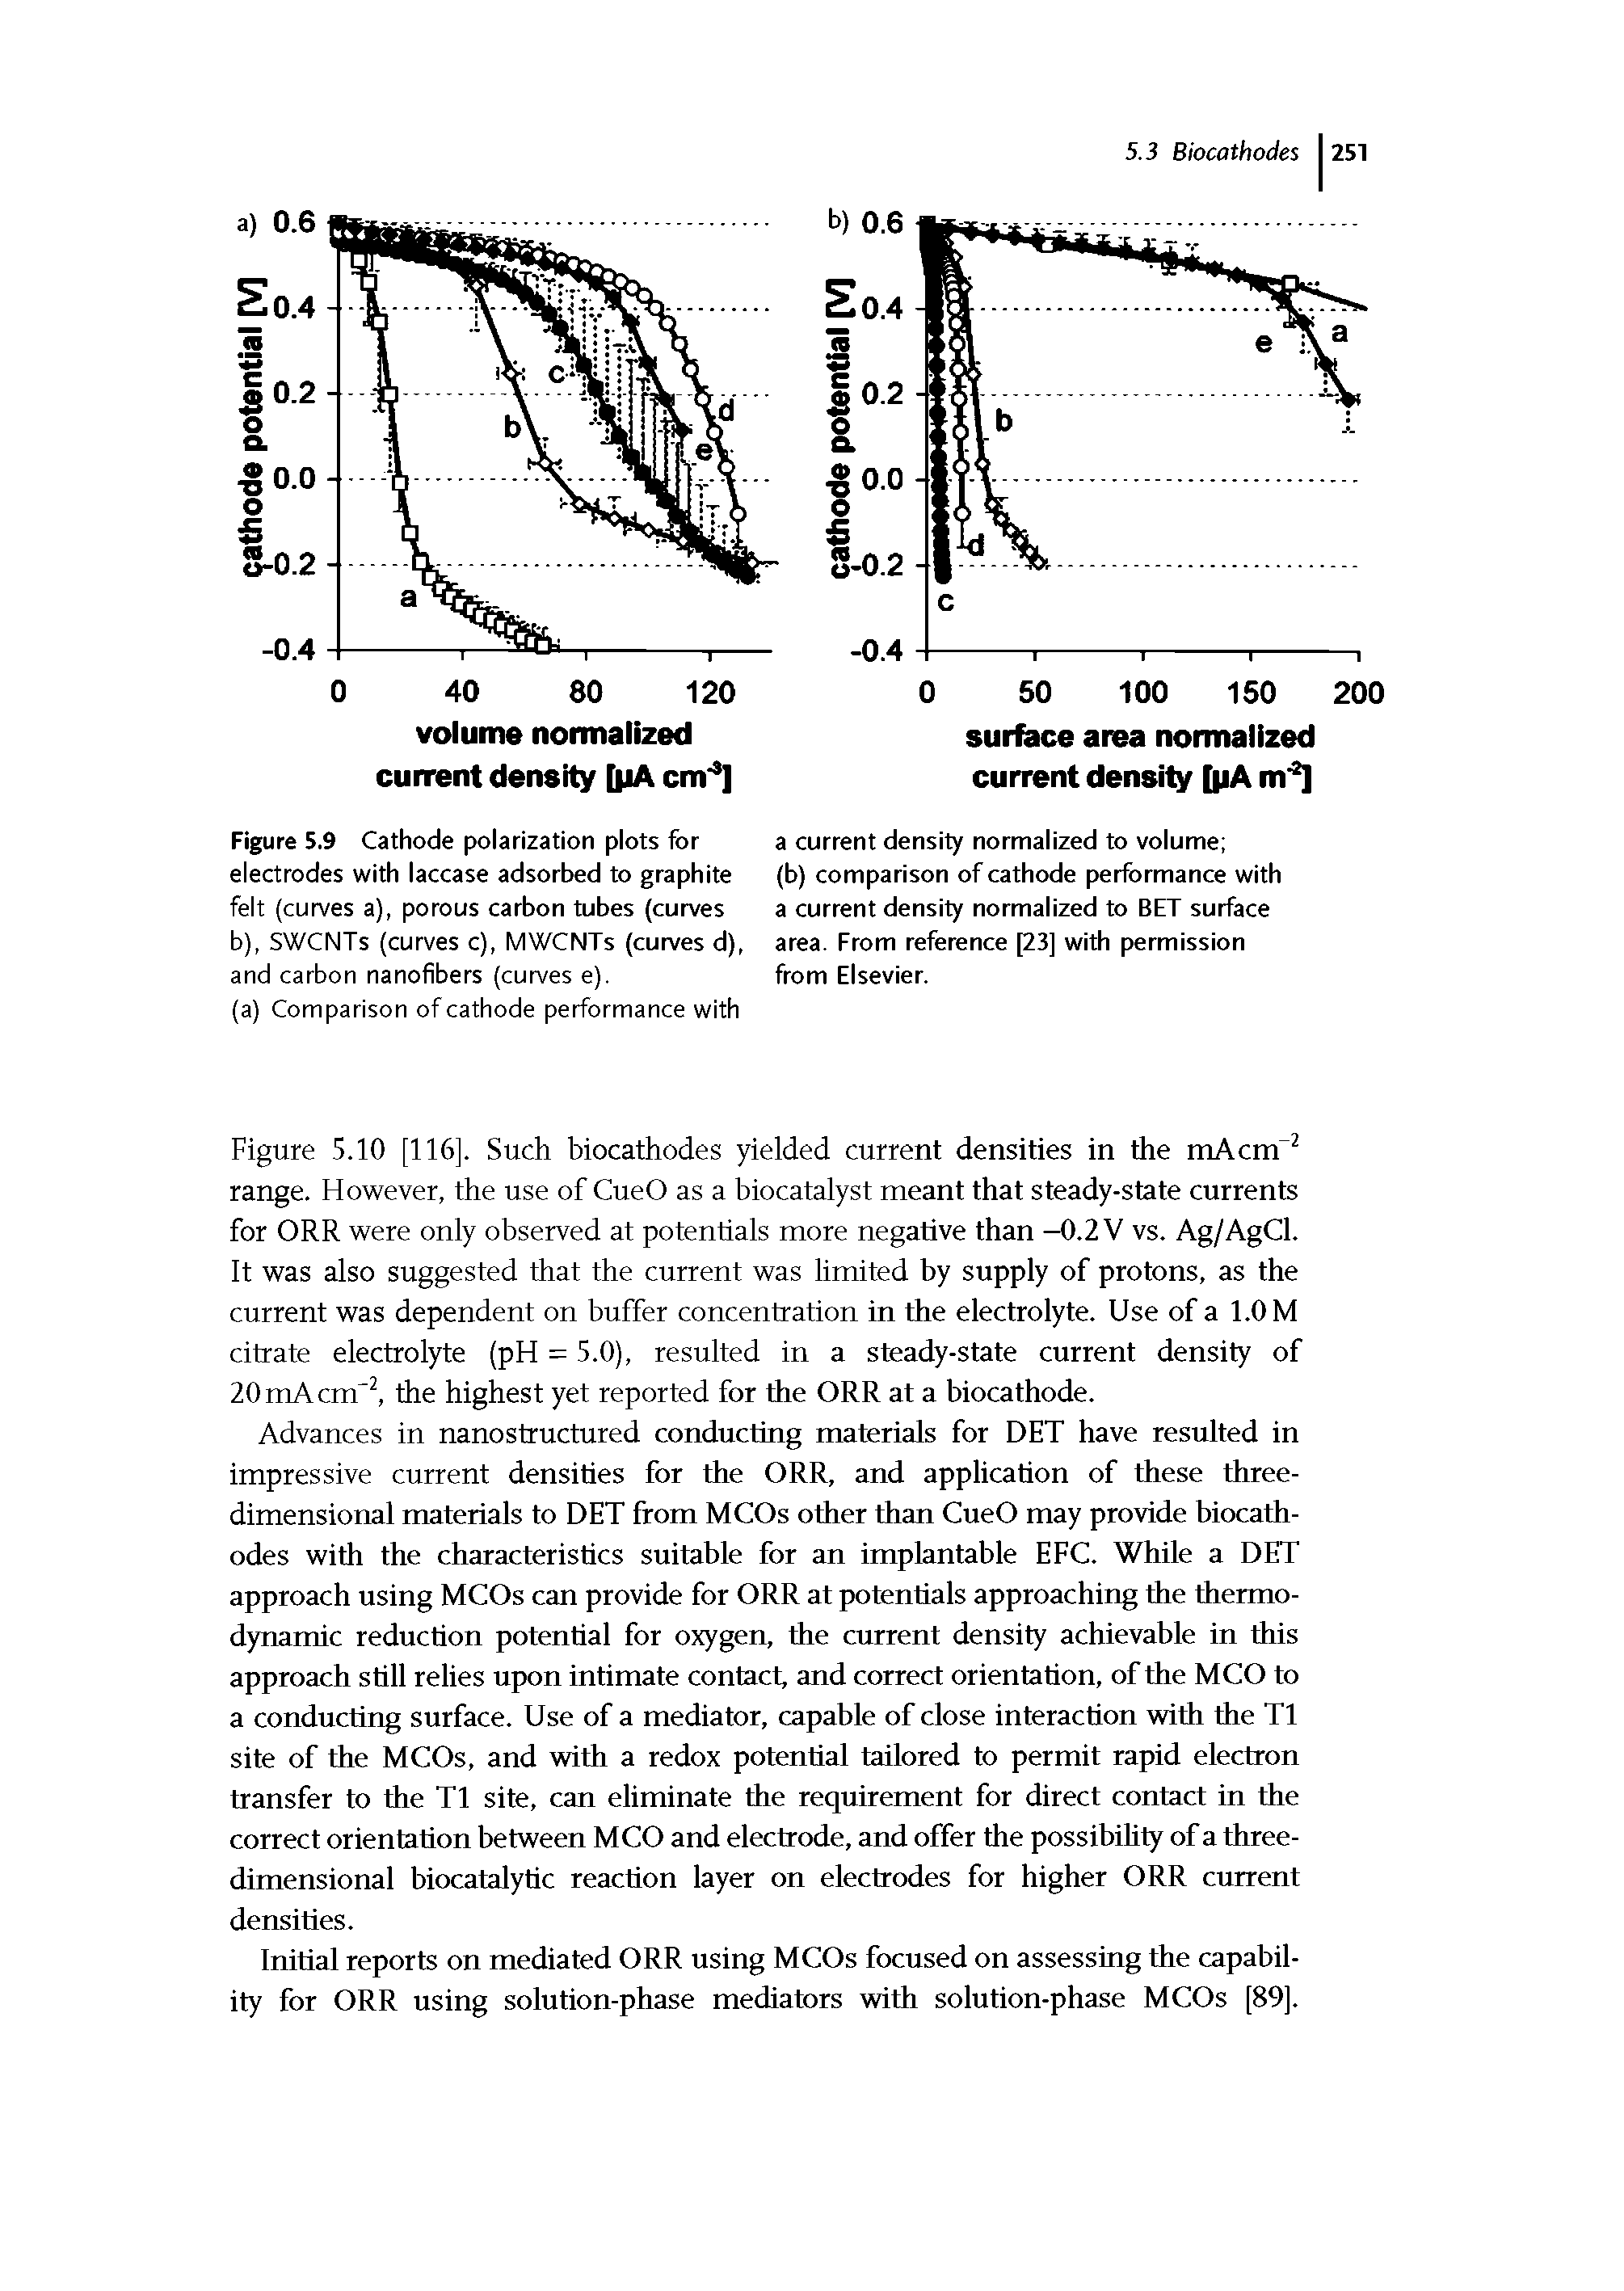 Figure 5.10 [116]. Such biocathodes yielded current densities in the mAcm range. However, the use of CueO as a biocatalyst meant that steady-state currents for ORR were only observed at potentials more negative than —0.2 V vs. Ag/AgCl. It was also suggested that the current was limited by supply of protons, as the current was dependent on buffer concentration in the electrolyte. Use of a 1.0 M citrate electrolyte (pH = 5.0), resulted in a steady-state current density of 20 rriAcrrr the highest yet reported for the ORR at a biocathode.